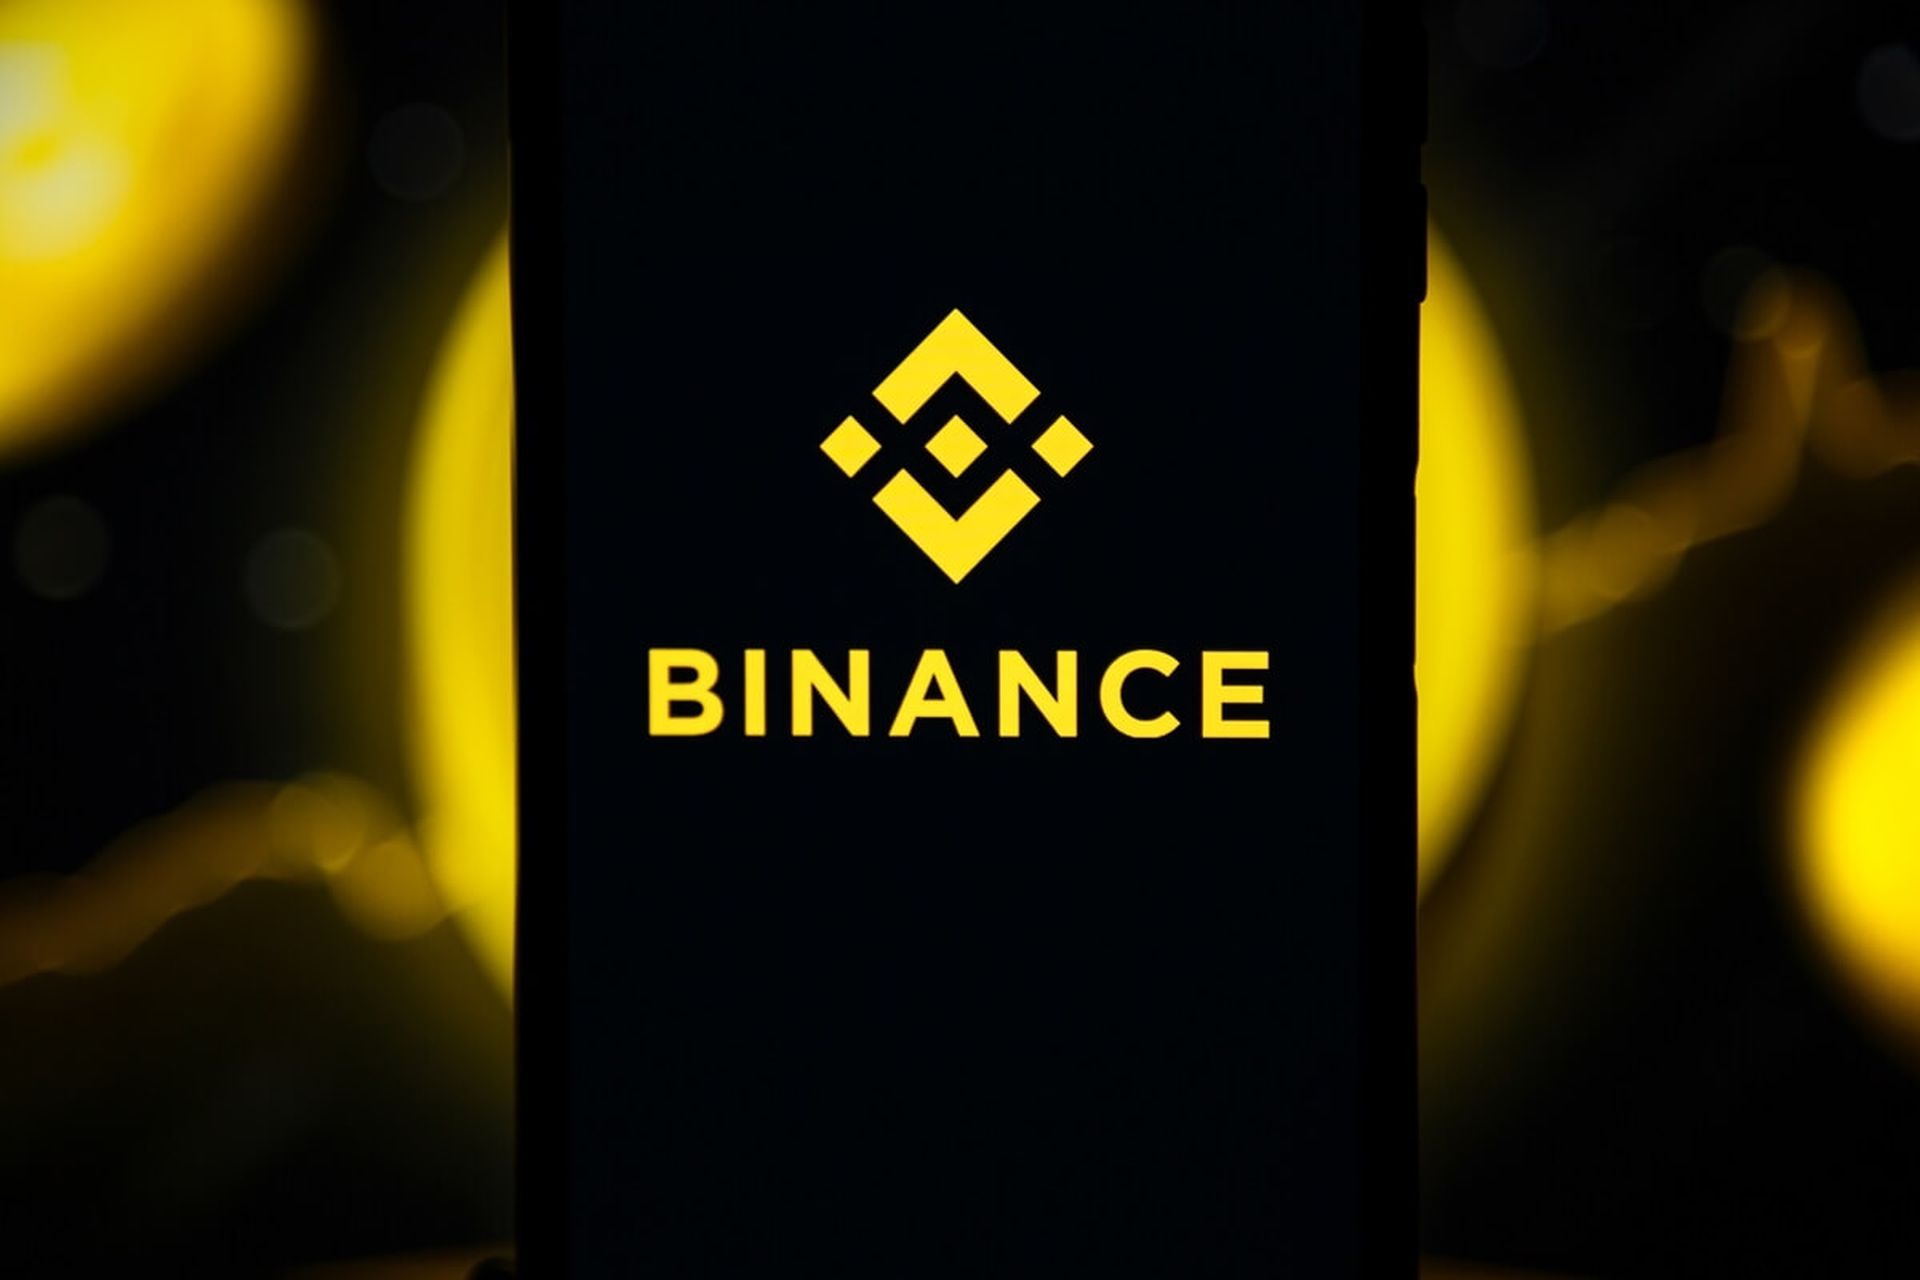 Today, we are here to show you the Binance Crypto WODL answers (September 19). If you find the correct cryptocurrency term in the Binance news, you might win...